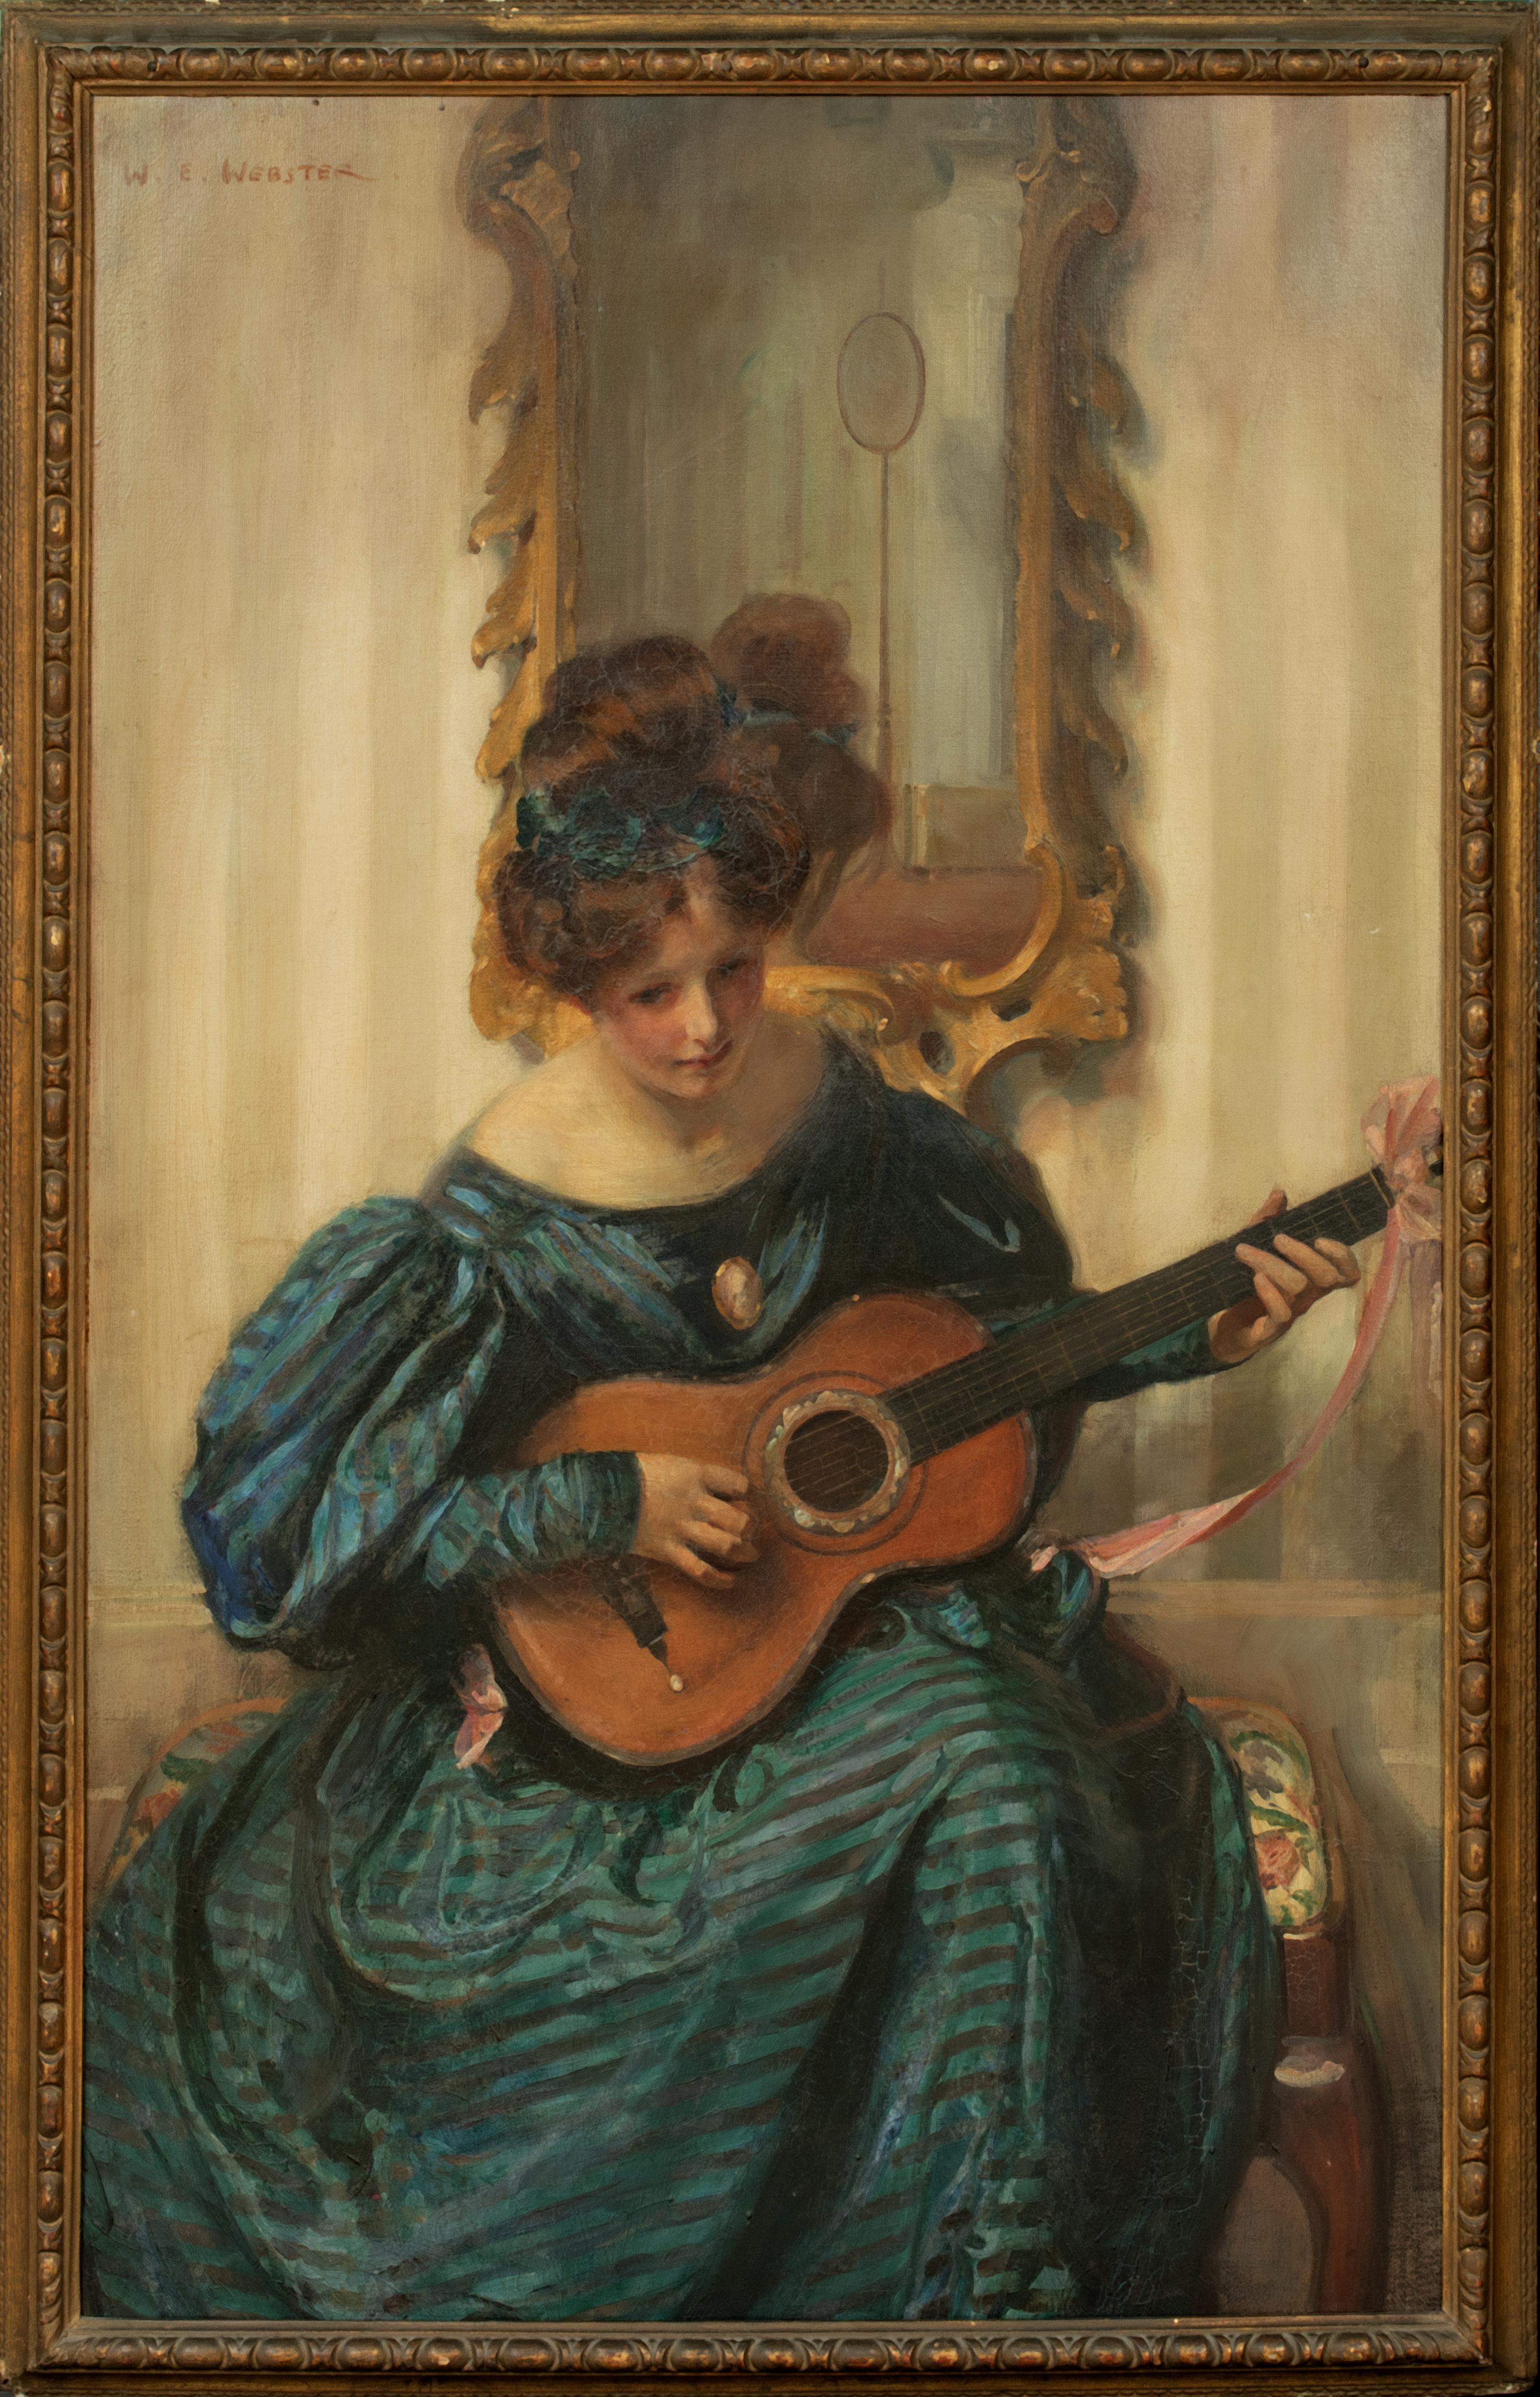 Walter Ernest Webster Portrait Painting - Portrait of a Lady Playing The Guitar, 19th Century   by WALTER ERNEST WEBSTER 